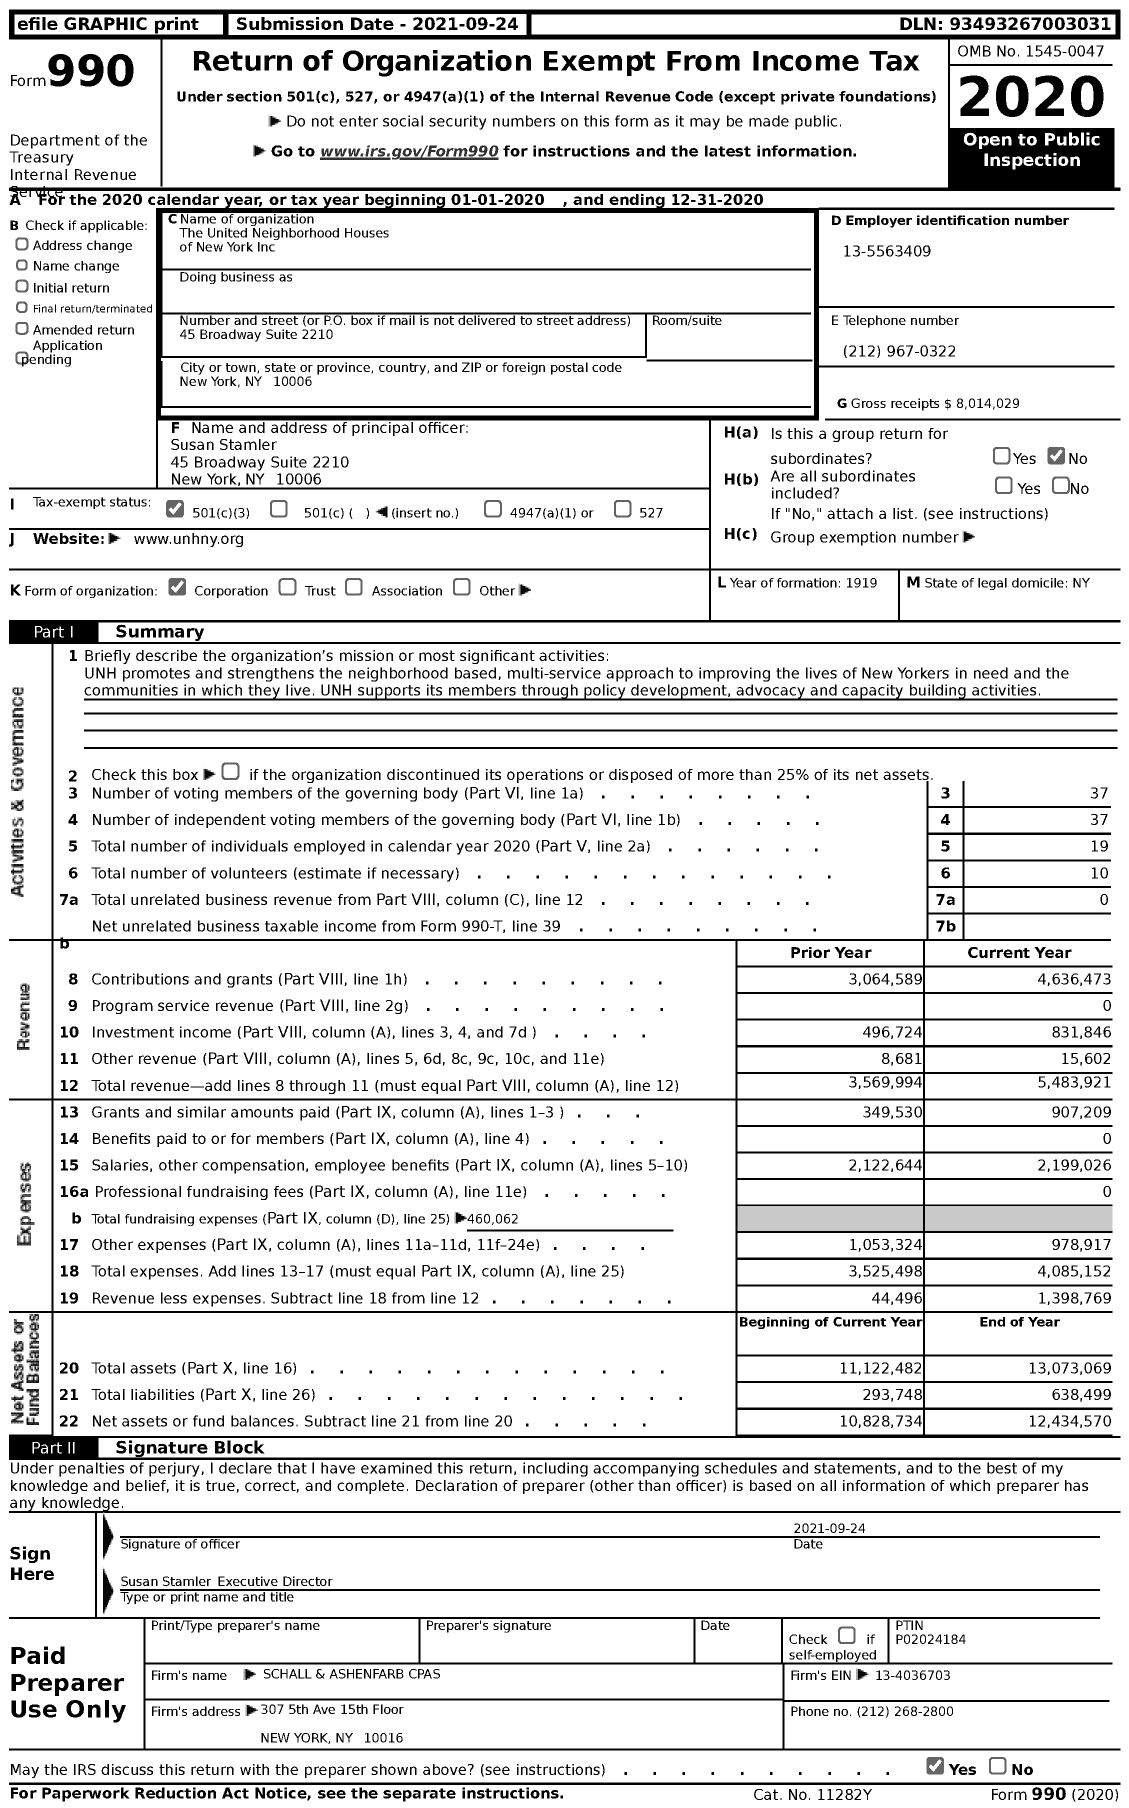 Image of first page of 2020 Form 990 for The United Neighborhood Houses of New York (UNH)